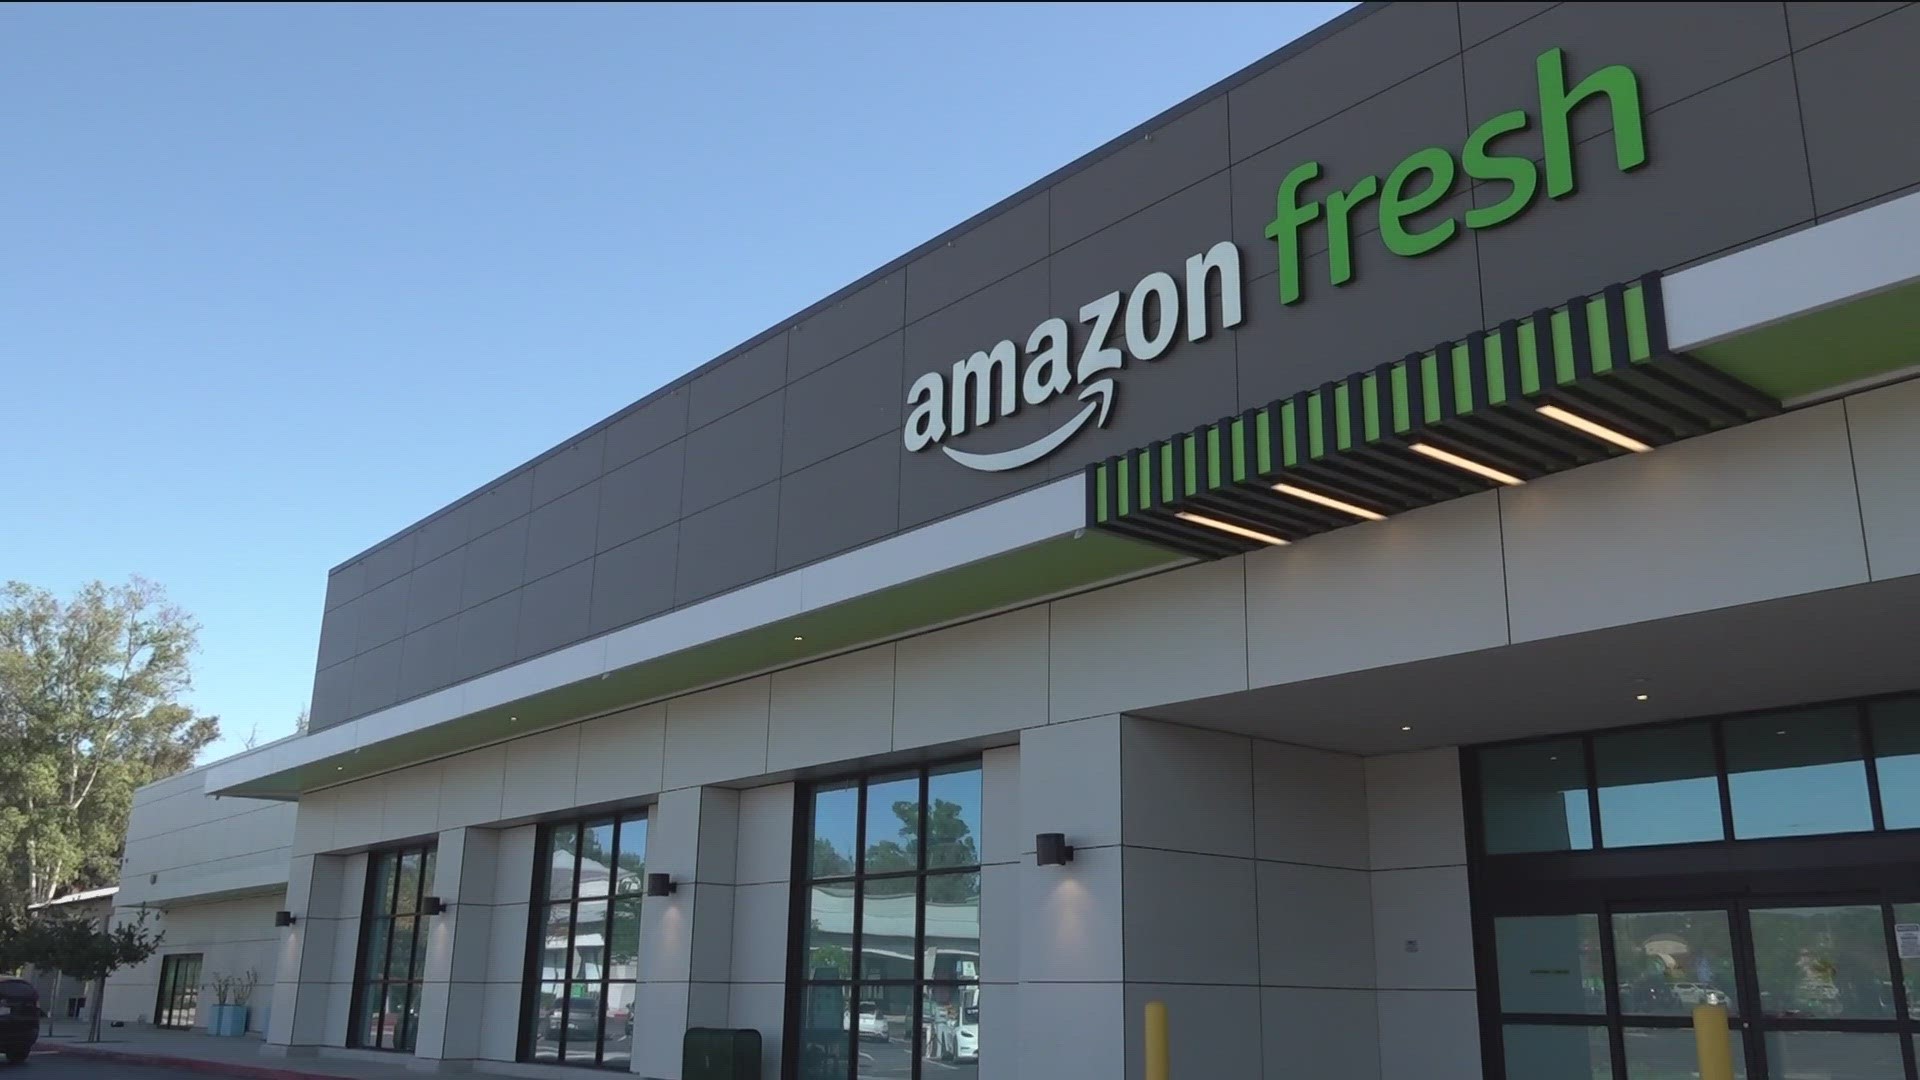 The Amazon Fresh on Pomerado Road has been empty for more than a year, leaving residents curious and frustrated.